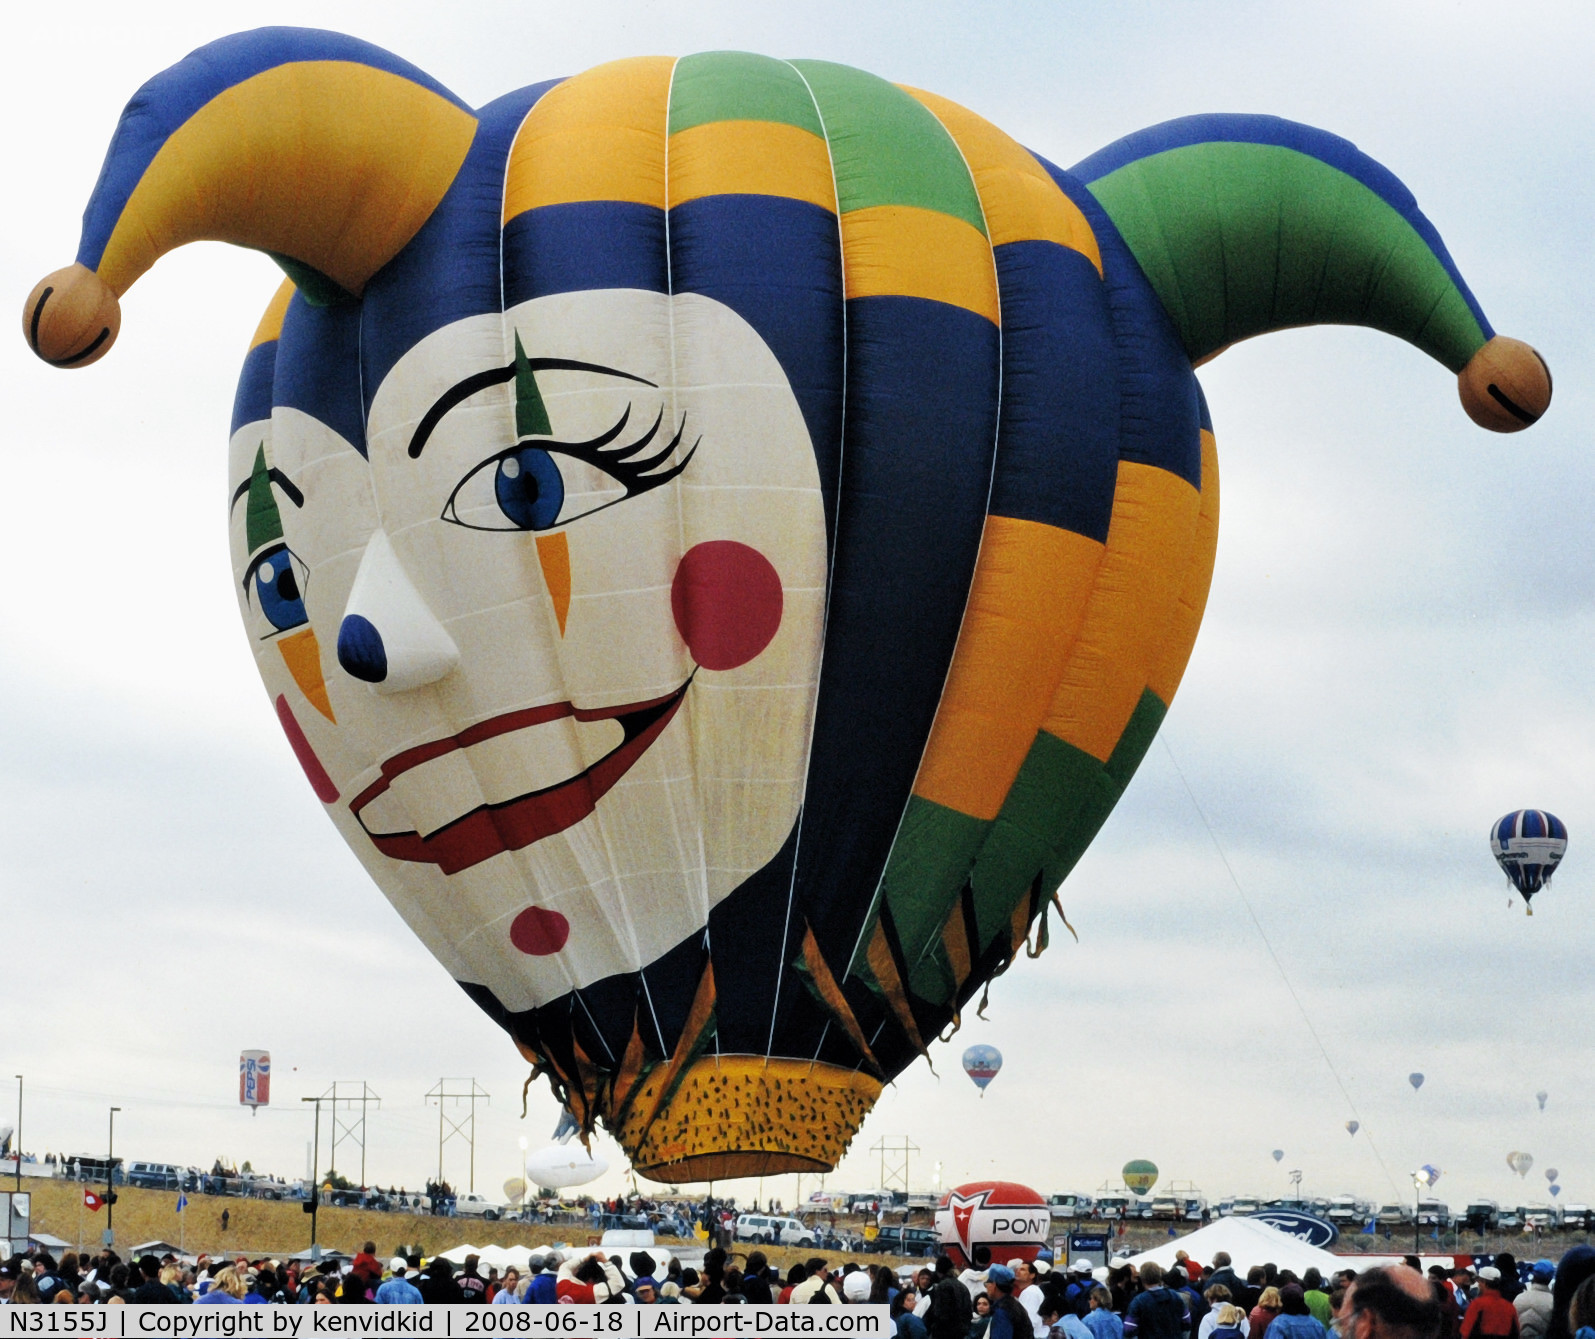 N3155J, 1996 Balloon Works FIREFLY 7-15 C/N F7-902, Lifting off at the 1996 Albuquerque Balloon Fiesta.